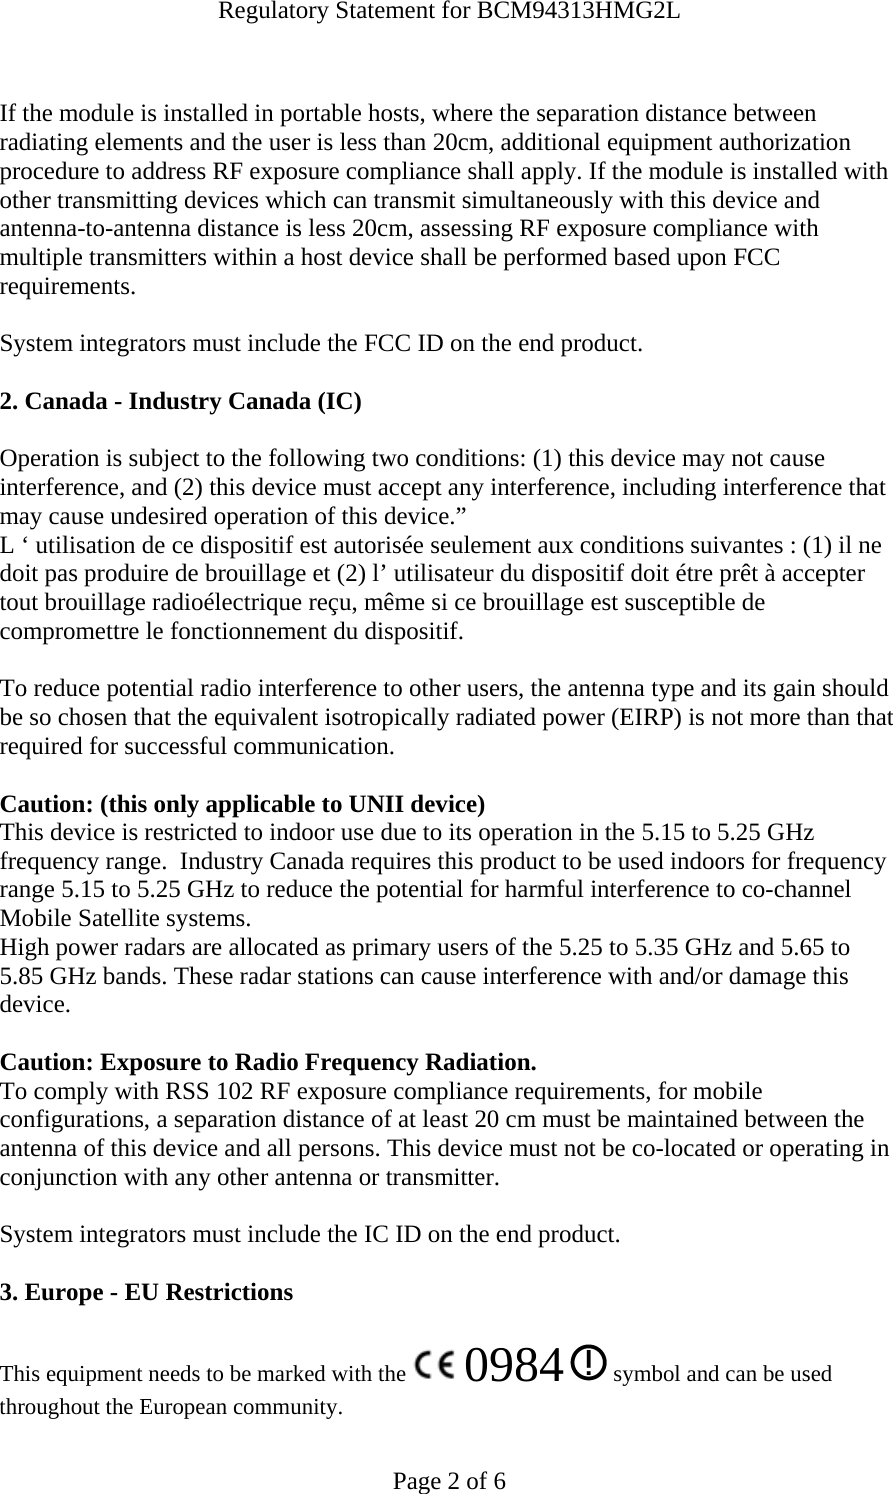 Regulatory Statement for BCM94313HMG2L  Page 2 of 6  If the module is installed in portable hosts, where the separation distance between radiating elements and the user is less than 20cm, additional equipment authorization procedure to address RF exposure compliance shall apply. If the module is installed with other transmitting devices which can transmit simultaneously with this device and antenna-to-antenna distance is less 20cm, assessing RF exposure compliance with multiple transmitters within a host device shall be performed based upon FCC requirements.   System integrators must include the FCC ID on the end product.   2. Canada - Industry Canada (IC)  Operation is subject to the following two conditions: (1) this device may not cause interference, and (2) this device must accept any interference, including interference that may cause undesired operation of this device.” L ‘ utilisation de ce dispositif est autorisée seulement aux conditions suivantes : (1) il ne doit pas produire de brouillage et (2) l’ utilisateur du dispositif doit étre prêt à accepter tout brouillage radioélectrique reçu, même si ce brouillage est susceptible de compromettre le fonctionnement du dispositif.  To reduce potential radio interference to other users, the antenna type and its gain should be so chosen that the equivalent isotropically radiated power (EIRP) is not more than that required for successful communication.  Caution: (this only applicable to UNII device) This device is restricted to indoor use due to its operation in the 5.15 to 5.25 GHz frequency range.  Industry Canada requires this product to be used indoors for frequency range 5.15 to 5.25 GHz to reduce the potential for harmful interference to co-channel Mobile Satellite systems. High power radars are allocated as primary users of the 5.25 to 5.35 GHz and 5.65 to 5.85 GHz bands. These radar stations can cause interference with and/or damage this device.  Caution: Exposure to Radio Frequency Radiation. To comply with RSS 102 RF exposure compliance requirements, for mobile configurations, a separation distance of at least 20 cm must be maintained between the antenna of this device and all persons. This device must not be co-located or operating in conjunction with any other antenna or transmitter.  System integrators must include the IC ID on the end product.   3. Europe - EU Restrictions This equipment needs to be marked with the   0984  symbol and can be used throughout the European community.  